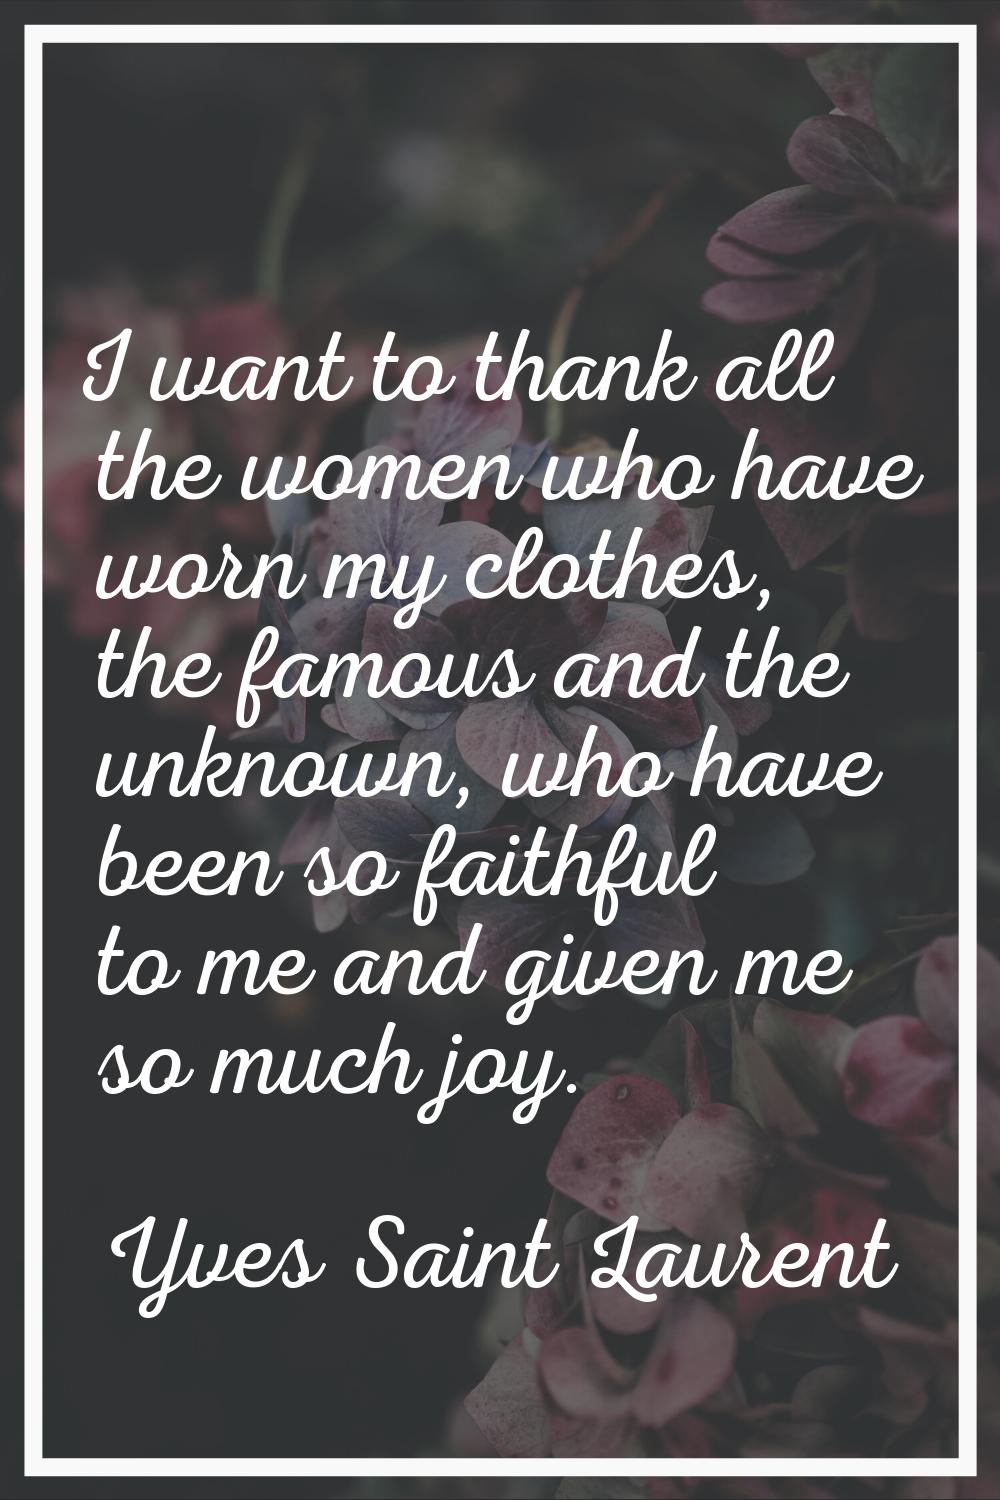 I want to thank all the women who have worn my clothes, the famous and the unknown, who have been s